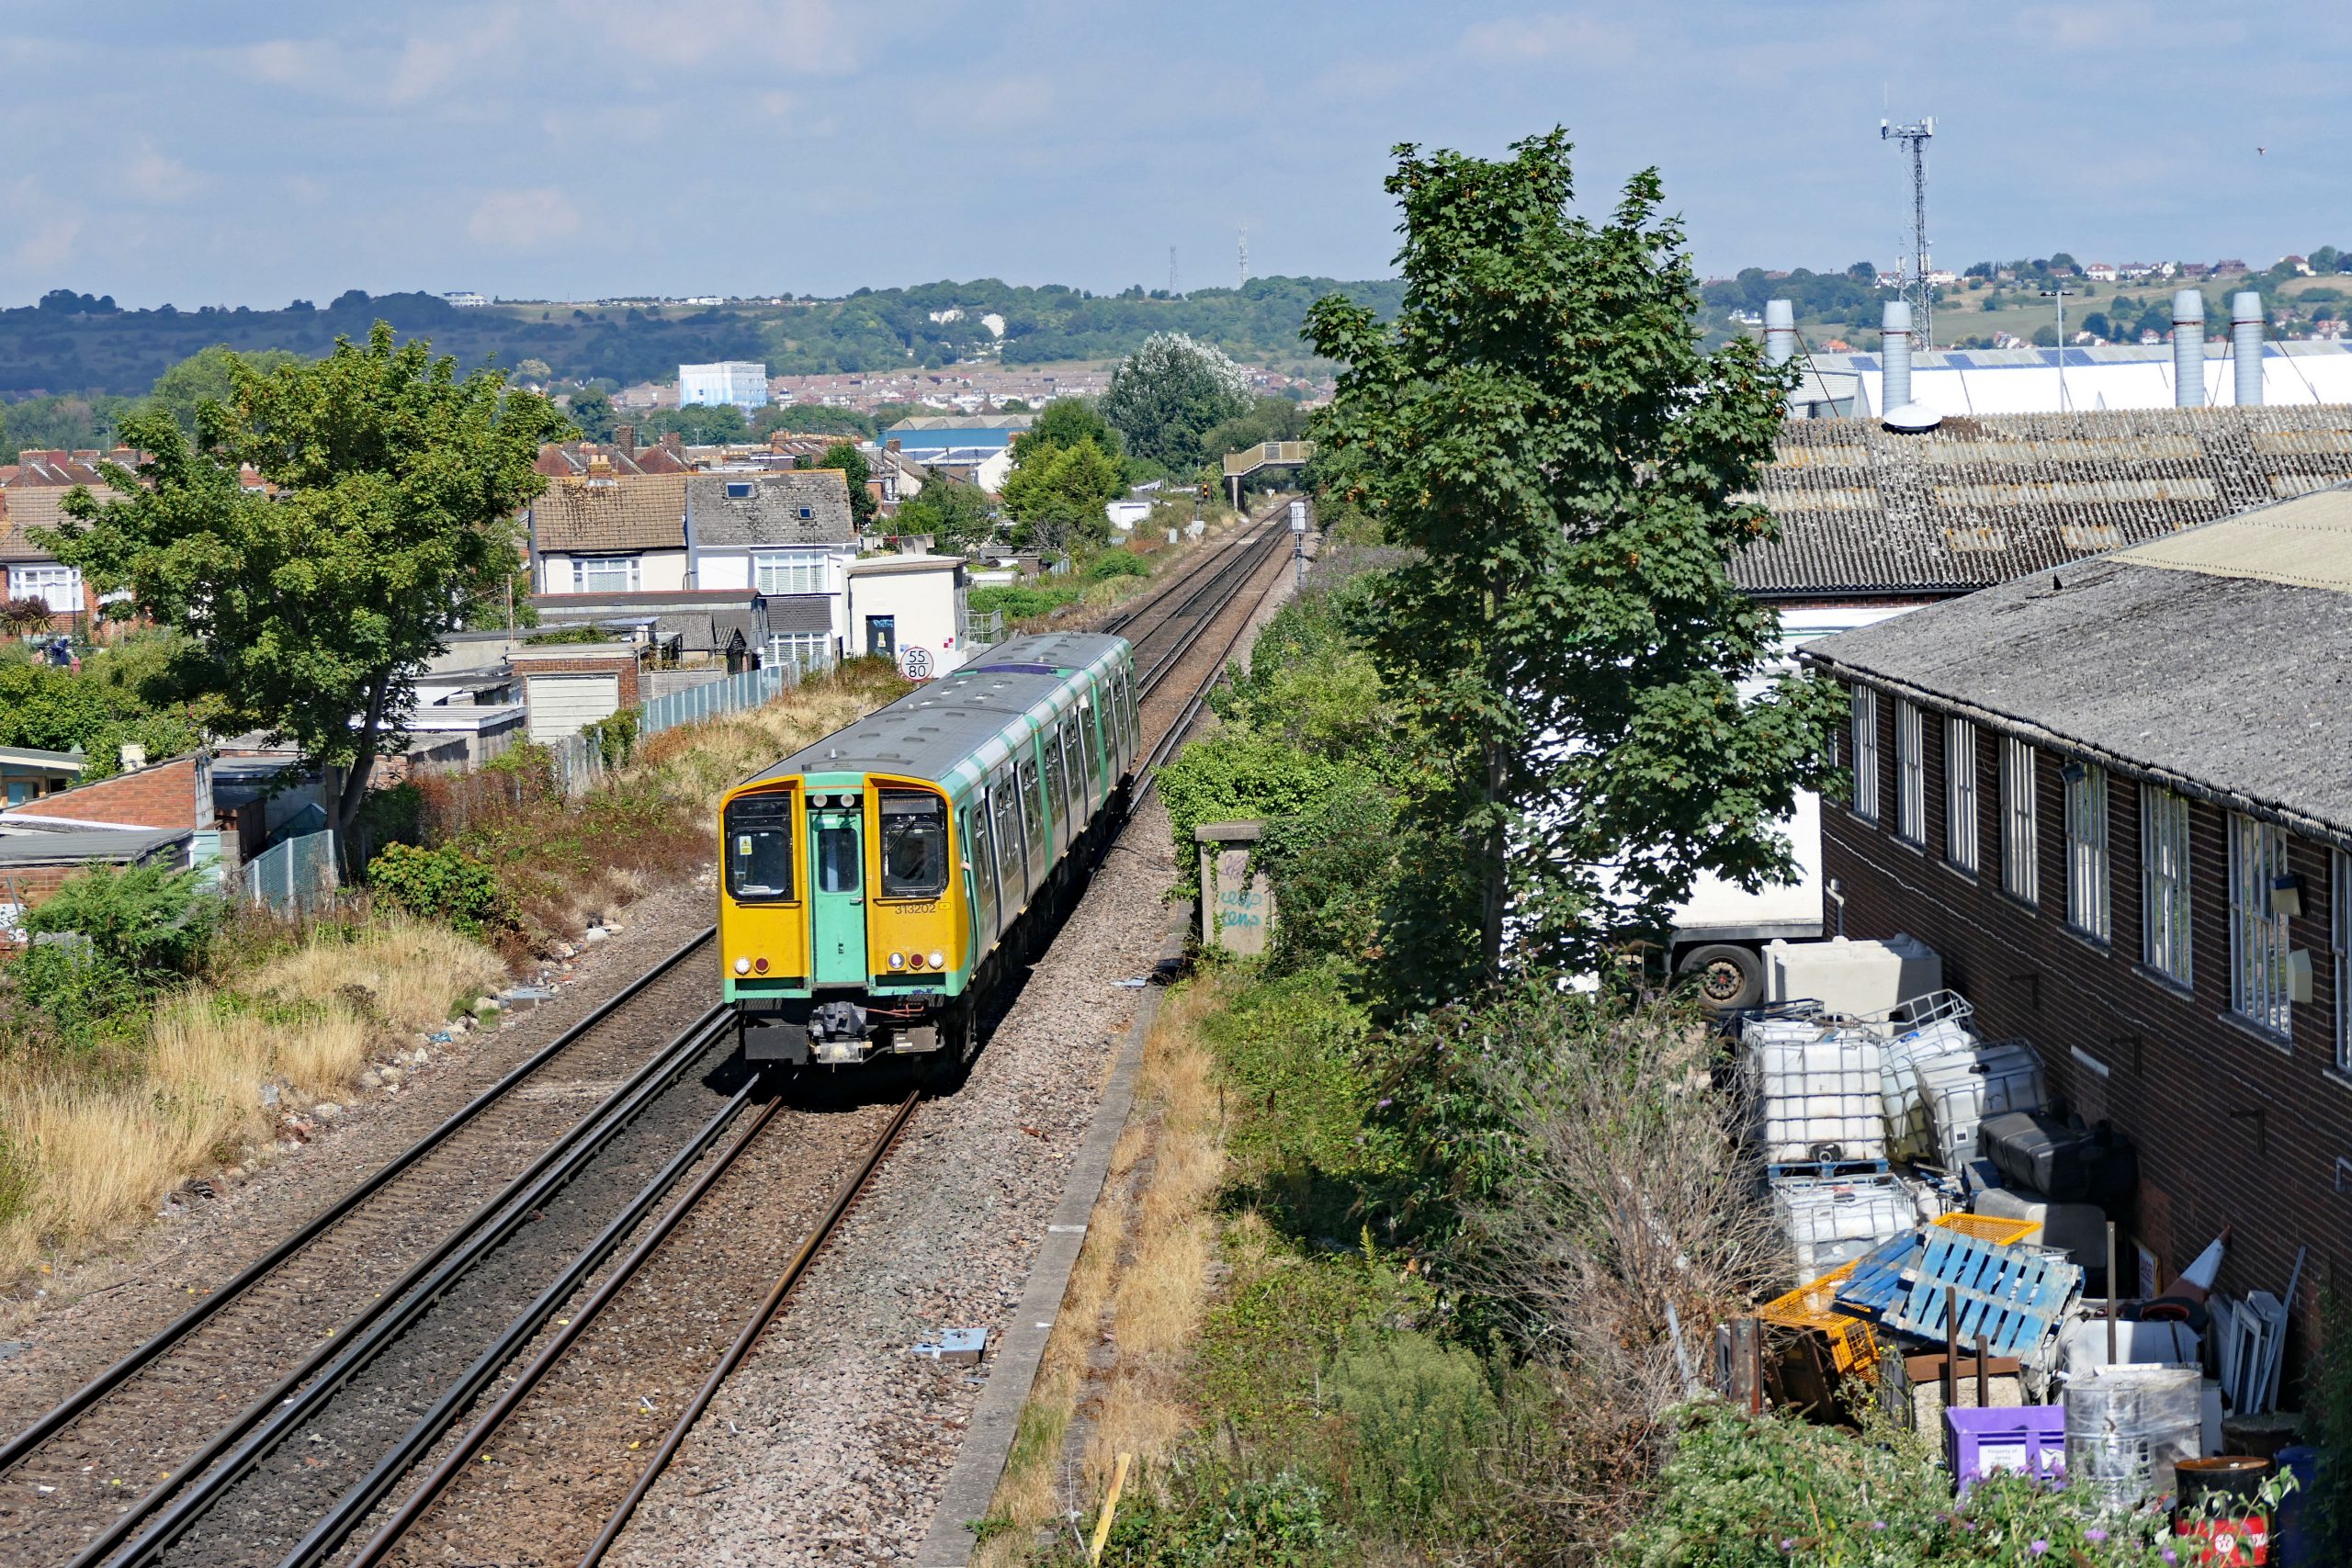 313 202 Accelerating away from Hilsea towards Fratton with the 11:55 Littlehampton to Portsmouth & Southsea service. 26 August 2022.